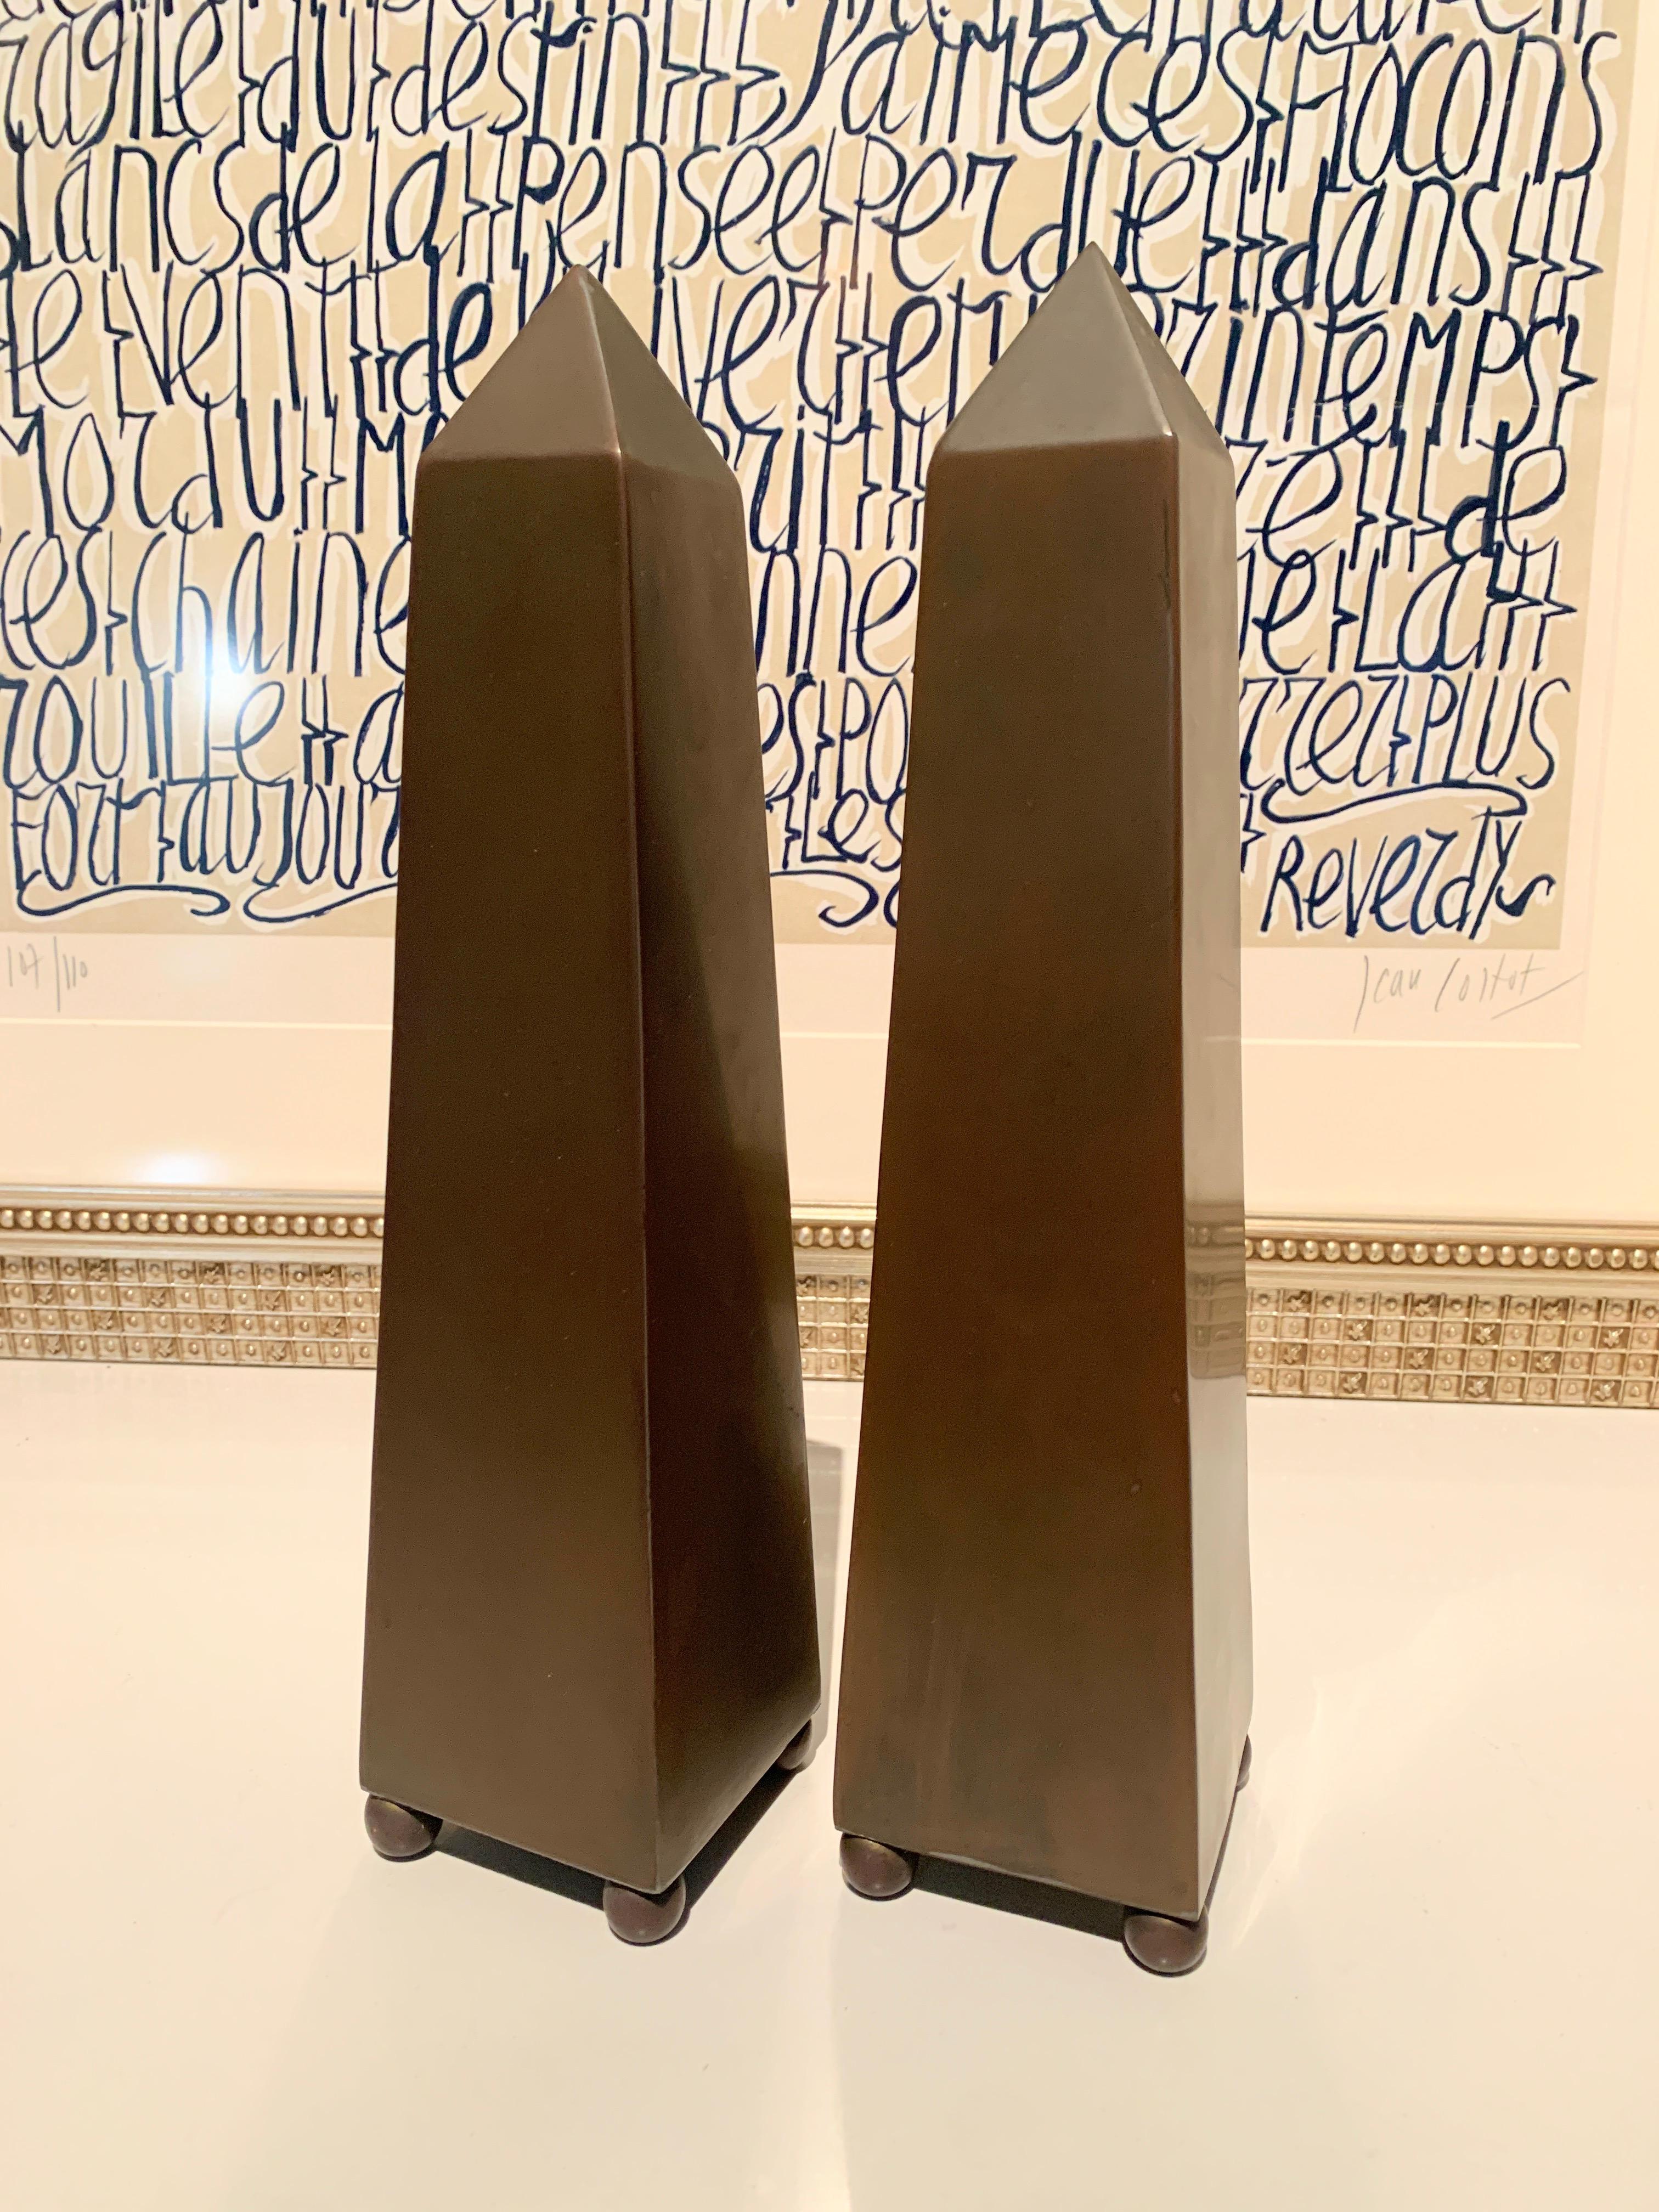 A wonderfully simple and elegant pair of Obelisks. Patinated Brass with spherical feet. The pair would be a nice compliment to any shelf, console table and books, or desk. A lovely and understated pair.